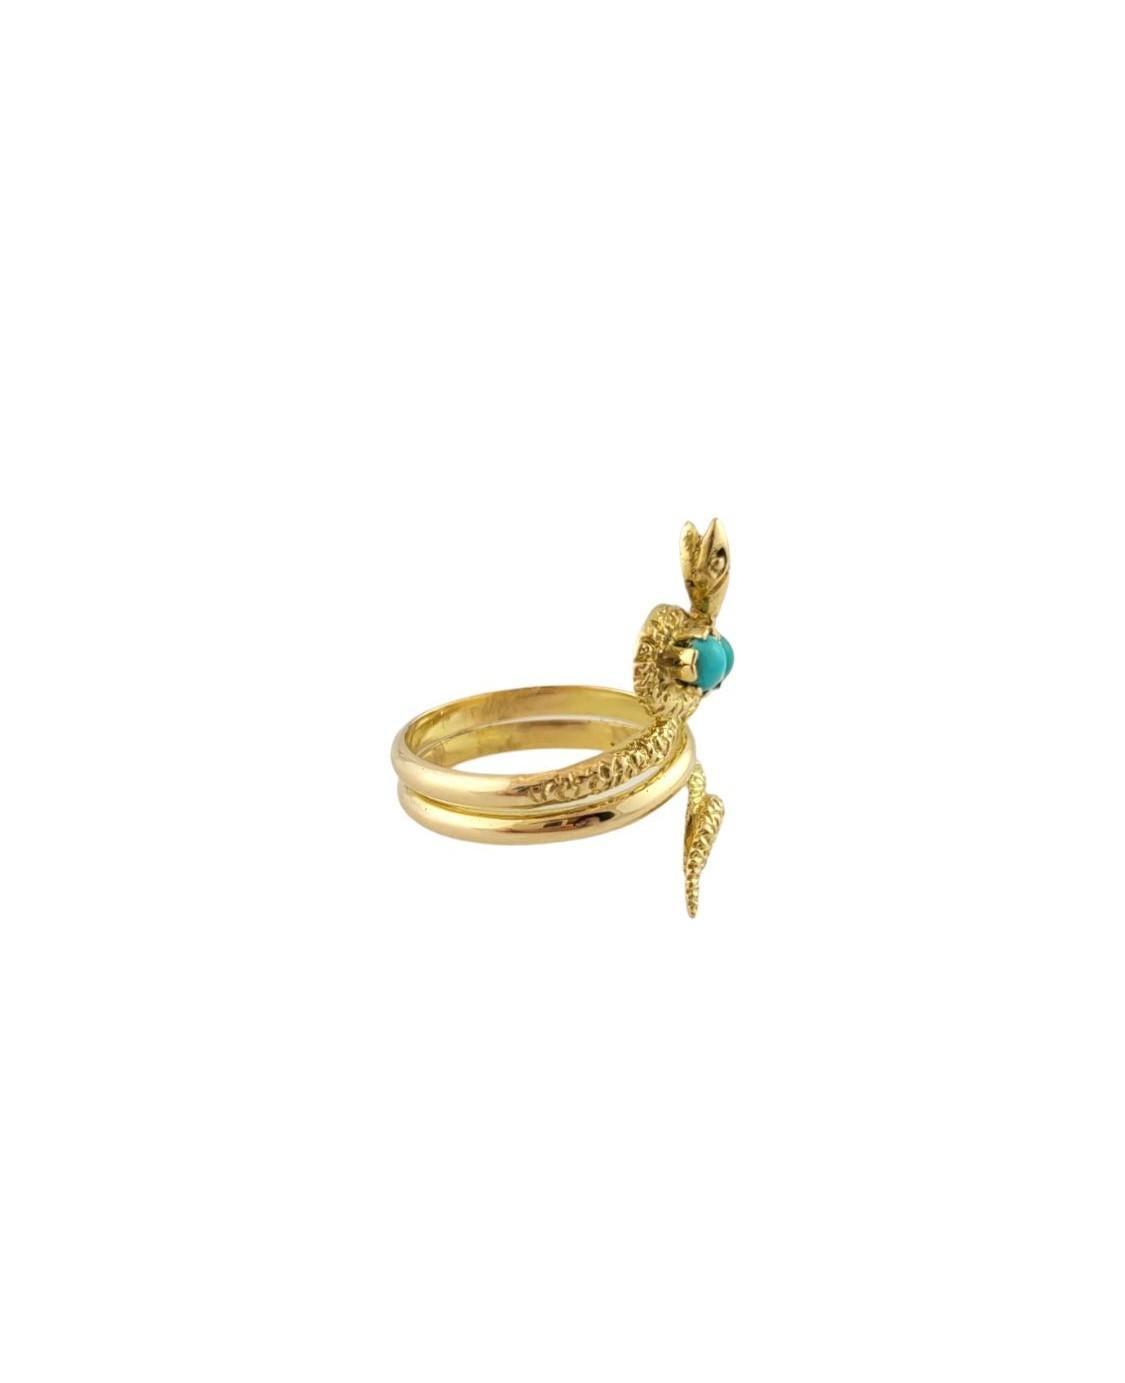 18 Karat Yellow Gold and Turquoise Snake Ring Size 7.5 #16616 In Good Condition For Sale In Washington Depot, CT